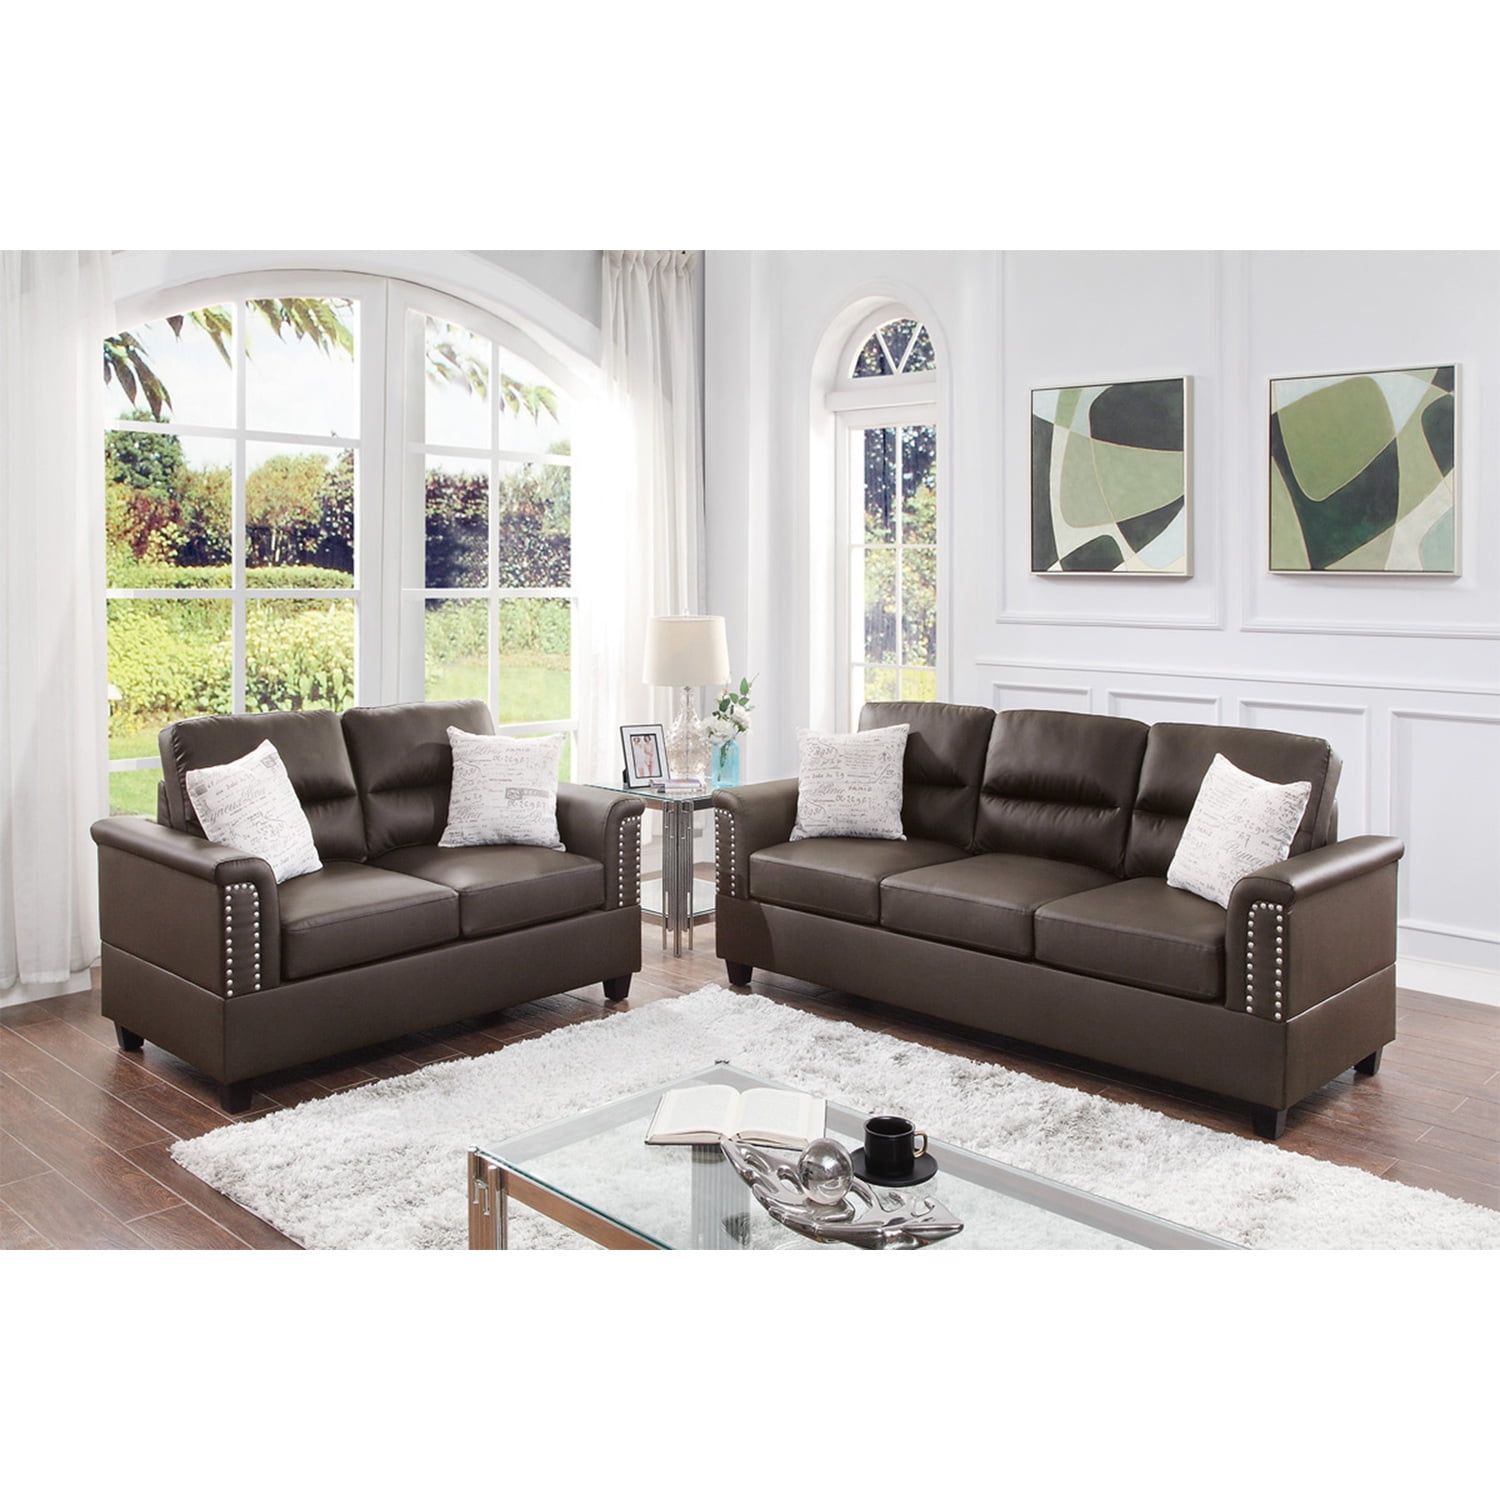 Poundex Furniture 2 Piece Faux Leather Sofa And Loveseat Set In Espresso  Color – Walmart Regarding Faux Leather Sofas In Chocolate Brown (Photo 15 of 15)